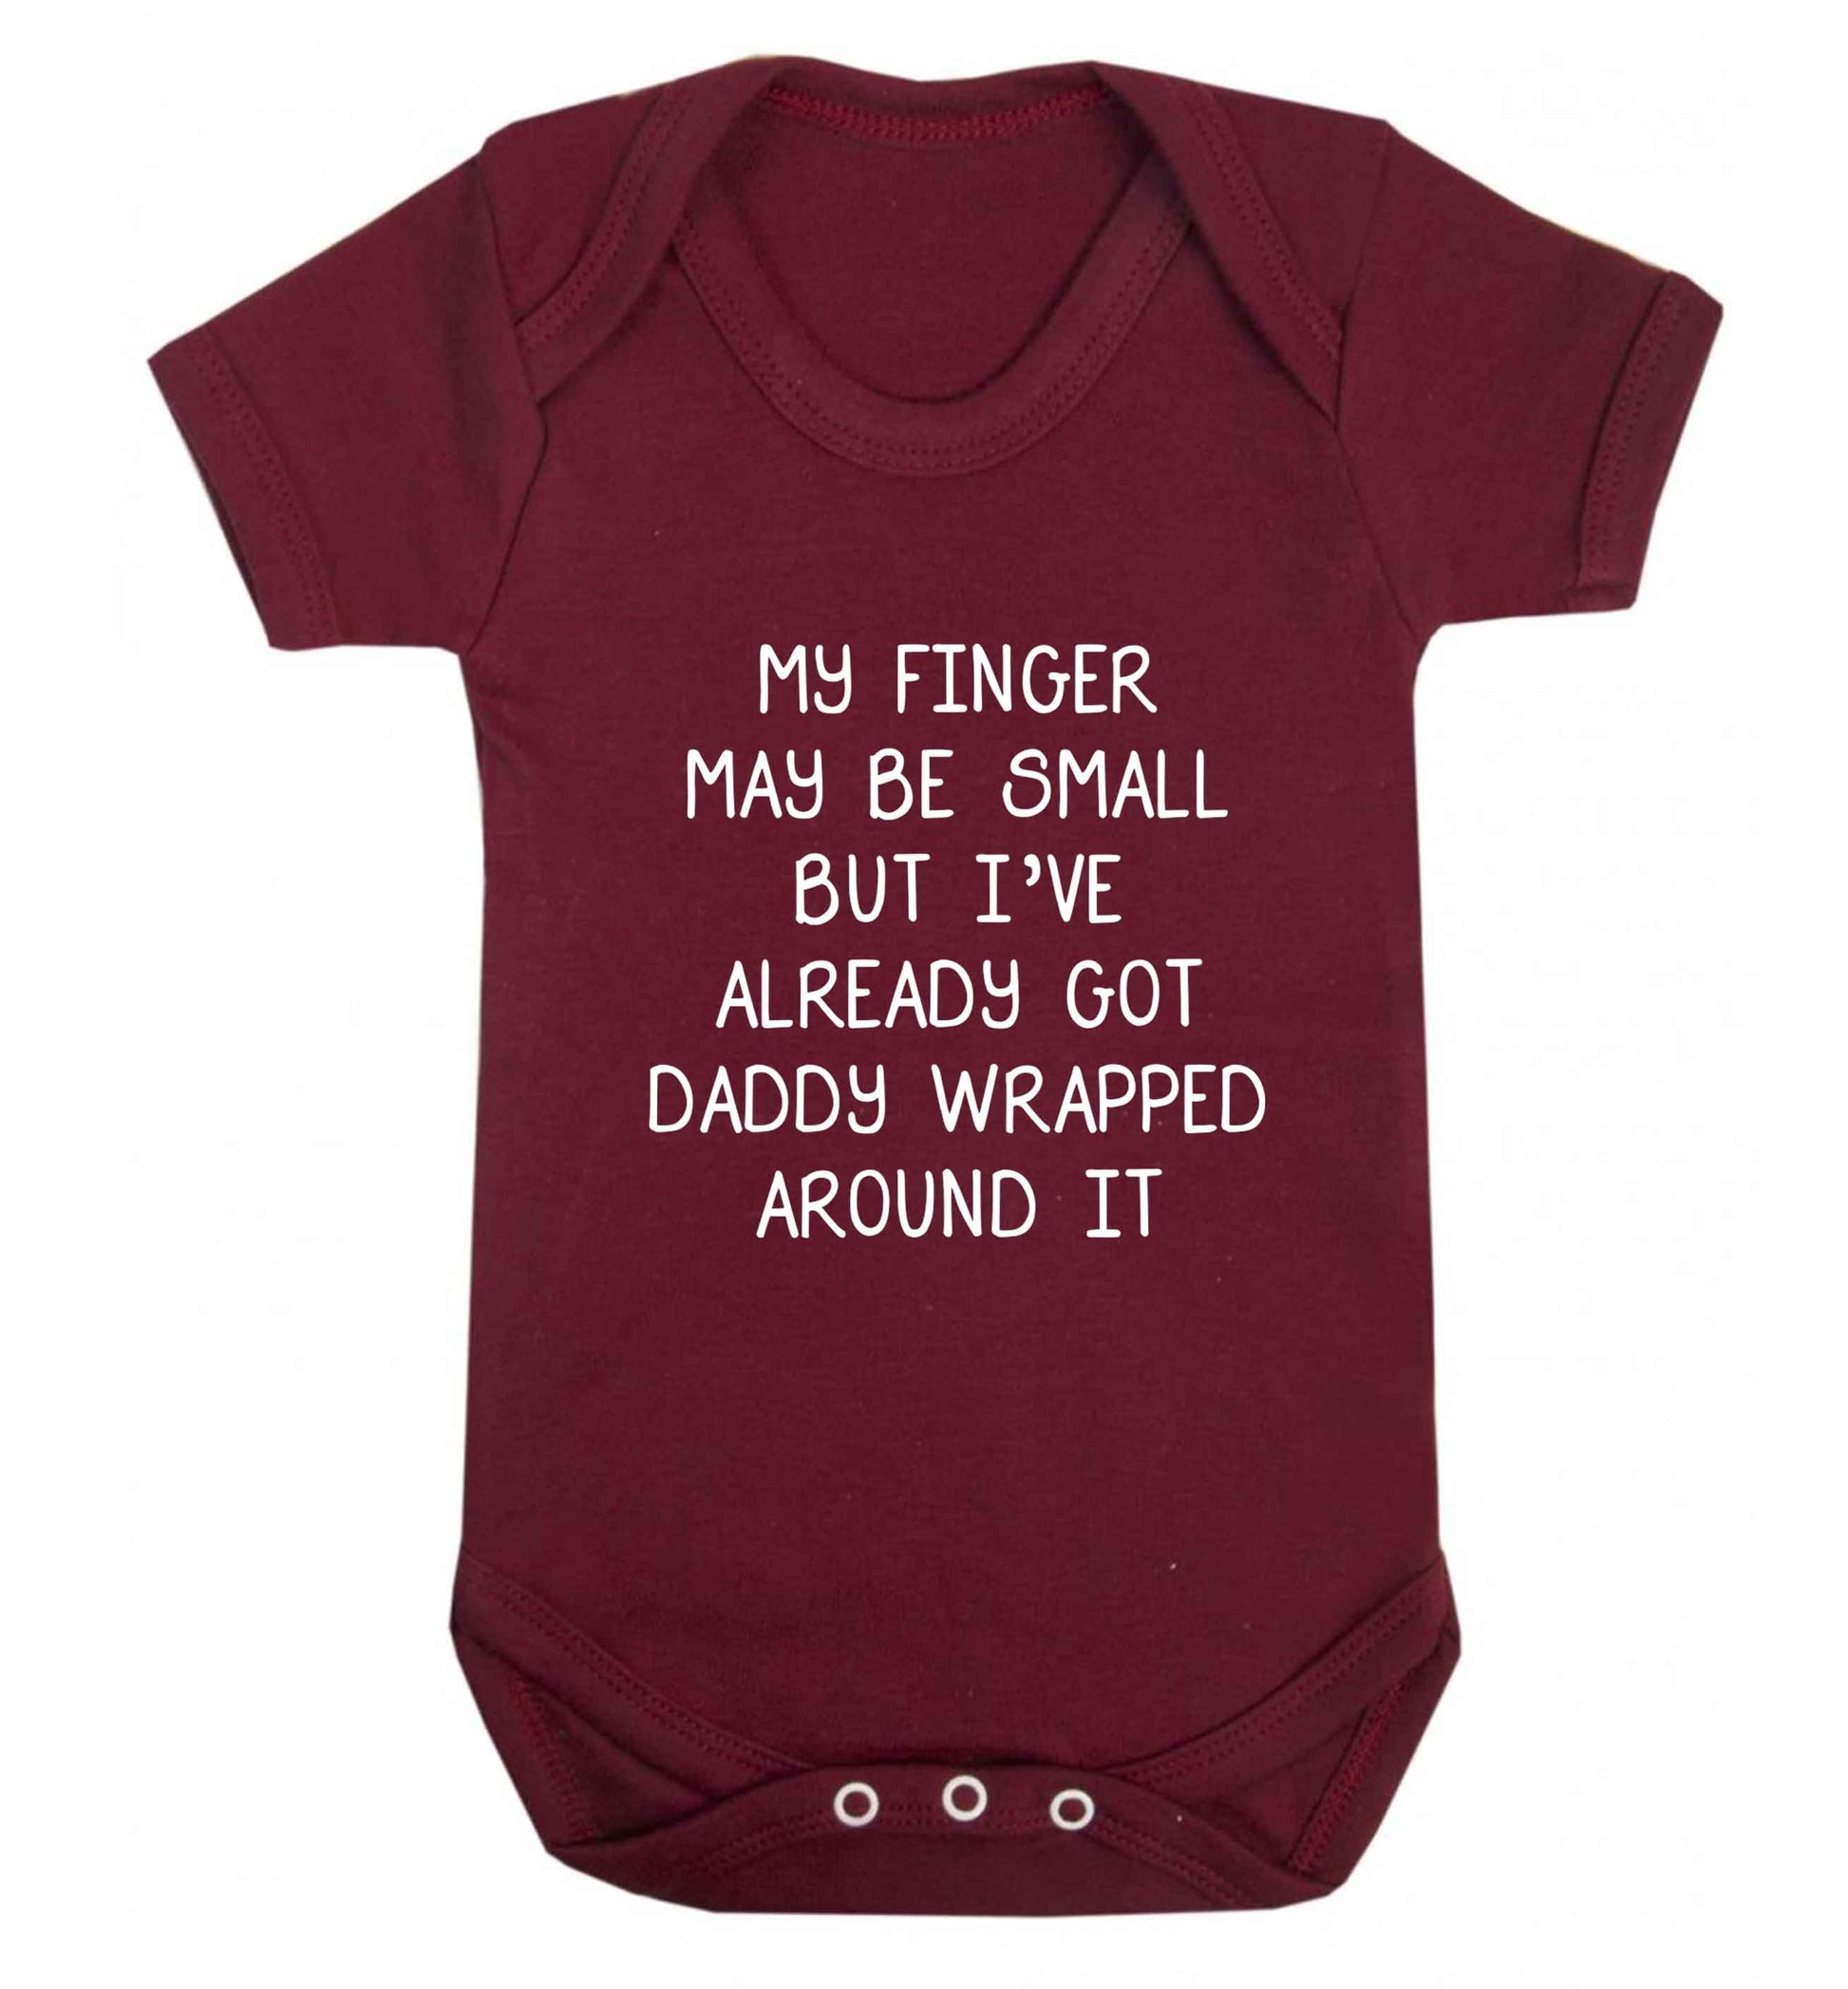 My finger may be small but I've already got daddy wrapped around it baby vest maroon 18-24 months